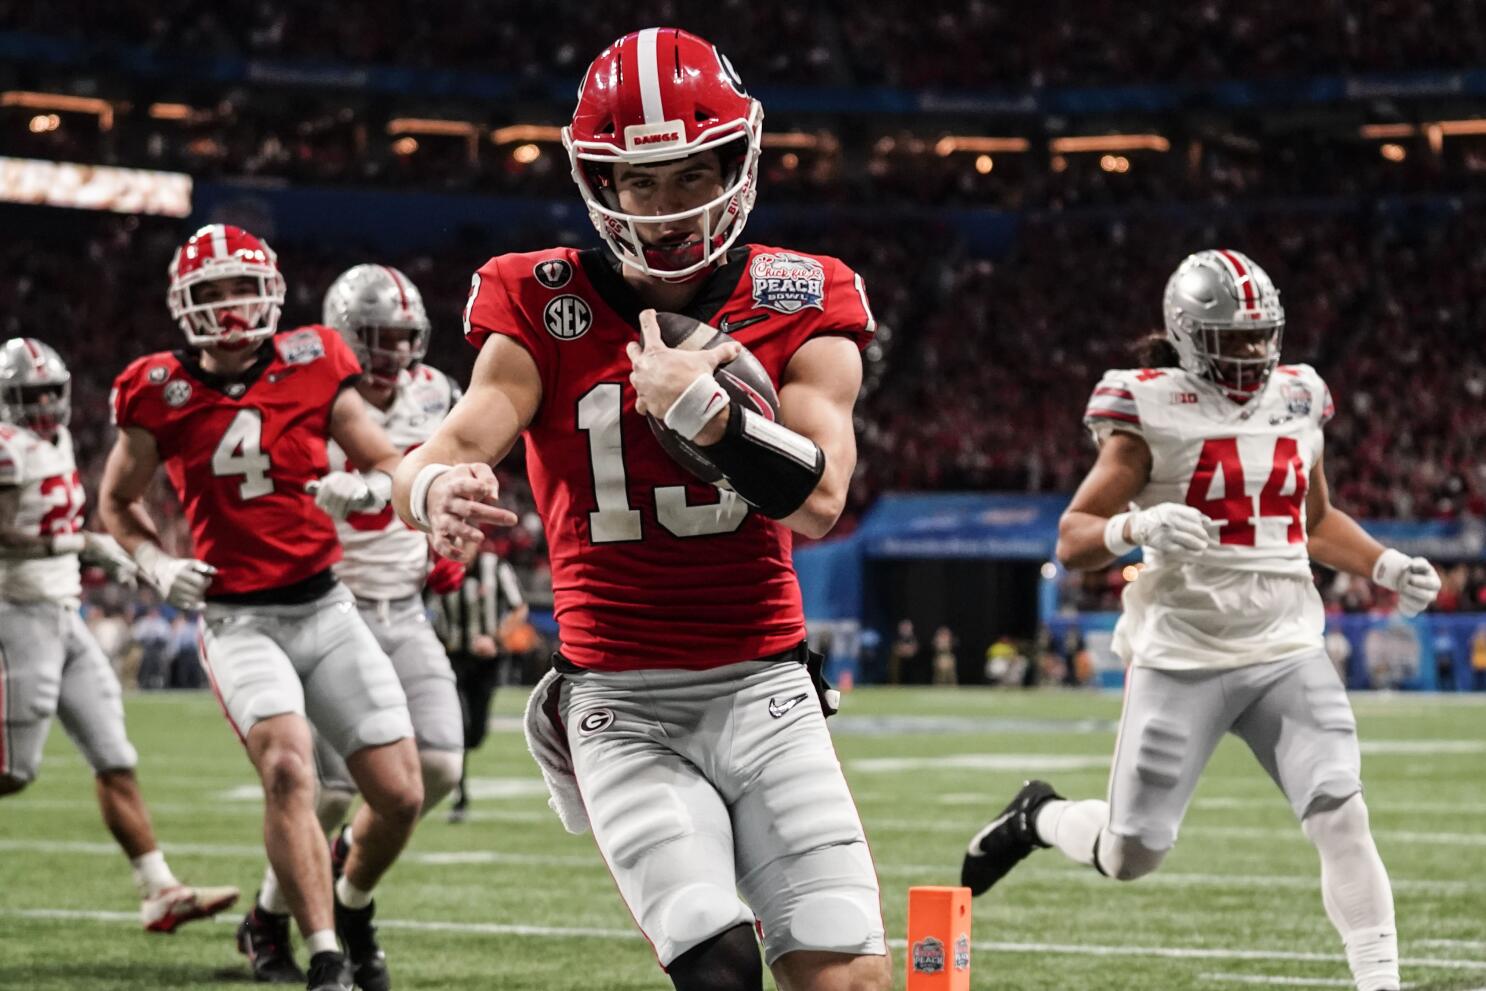 Georgia survives Ohio State in Peach Bowl to reach national title game